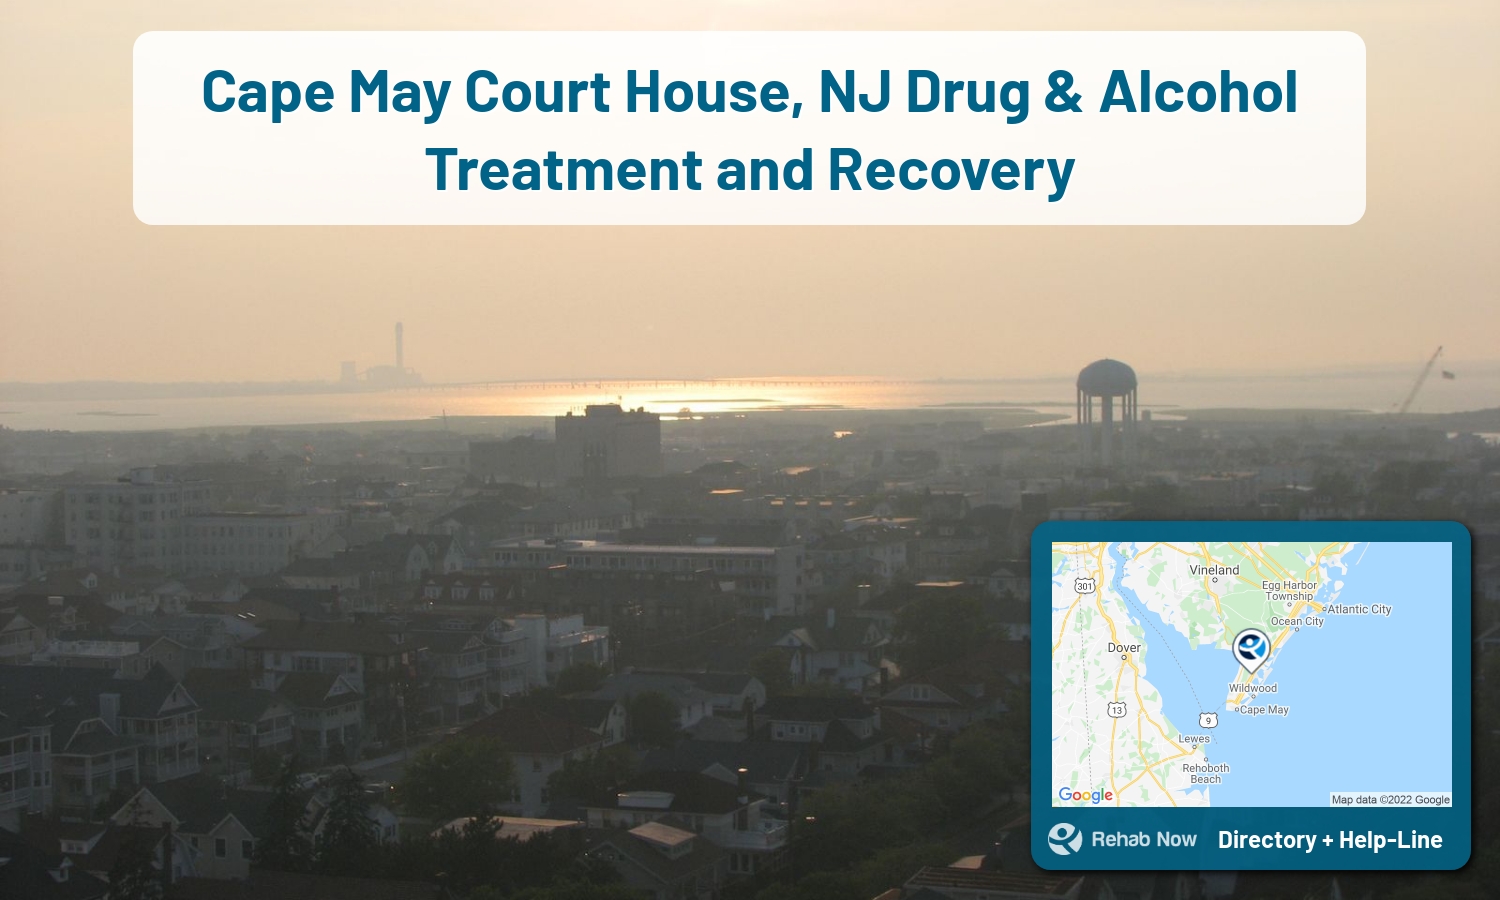 Ready to pick a rehab center in Cape May Court House? Get off alcohol, opiates, and other drugs, by selecting top drug rehab centers in New Jersey